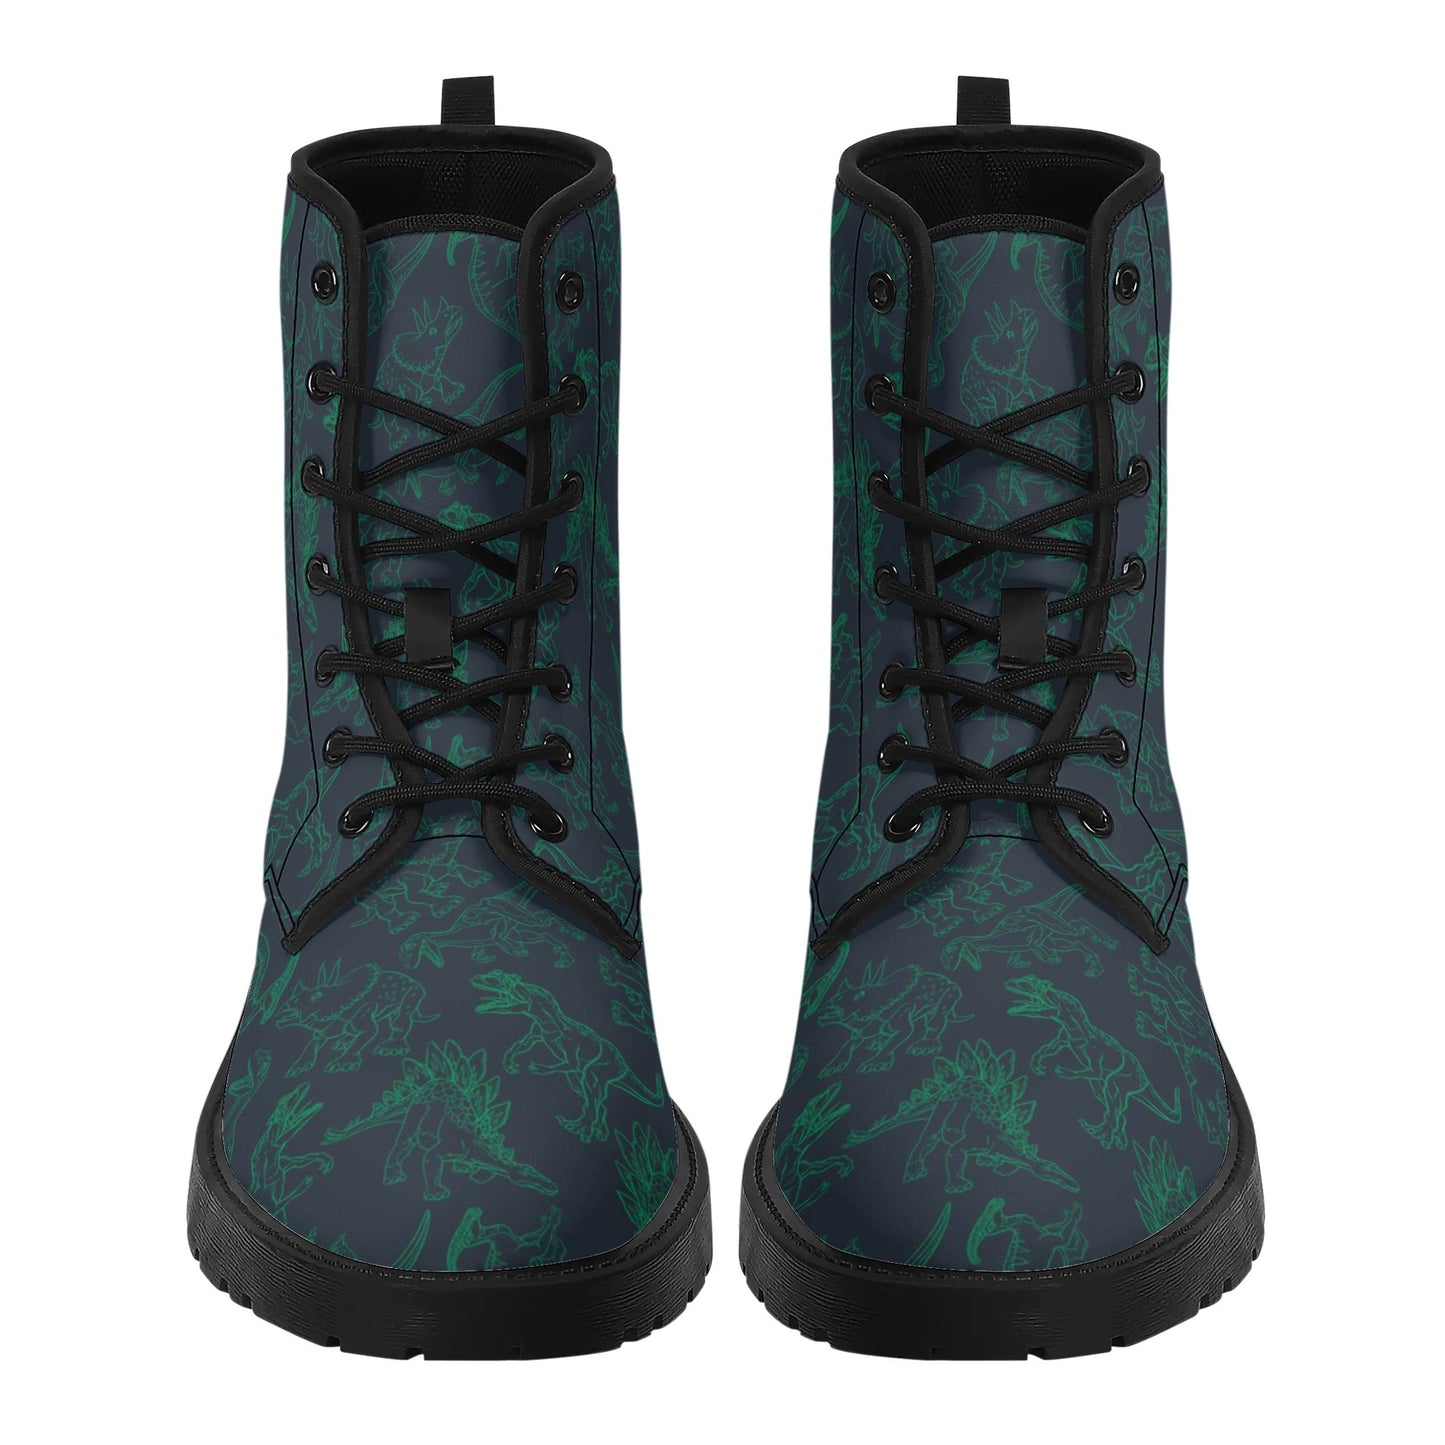 Dino Men Leather Boots, Dinosaur Green Vegan Lace Up Adult Shoes Hiking Festival Black Ankle Combat Work Winter Waterproof Guys Male